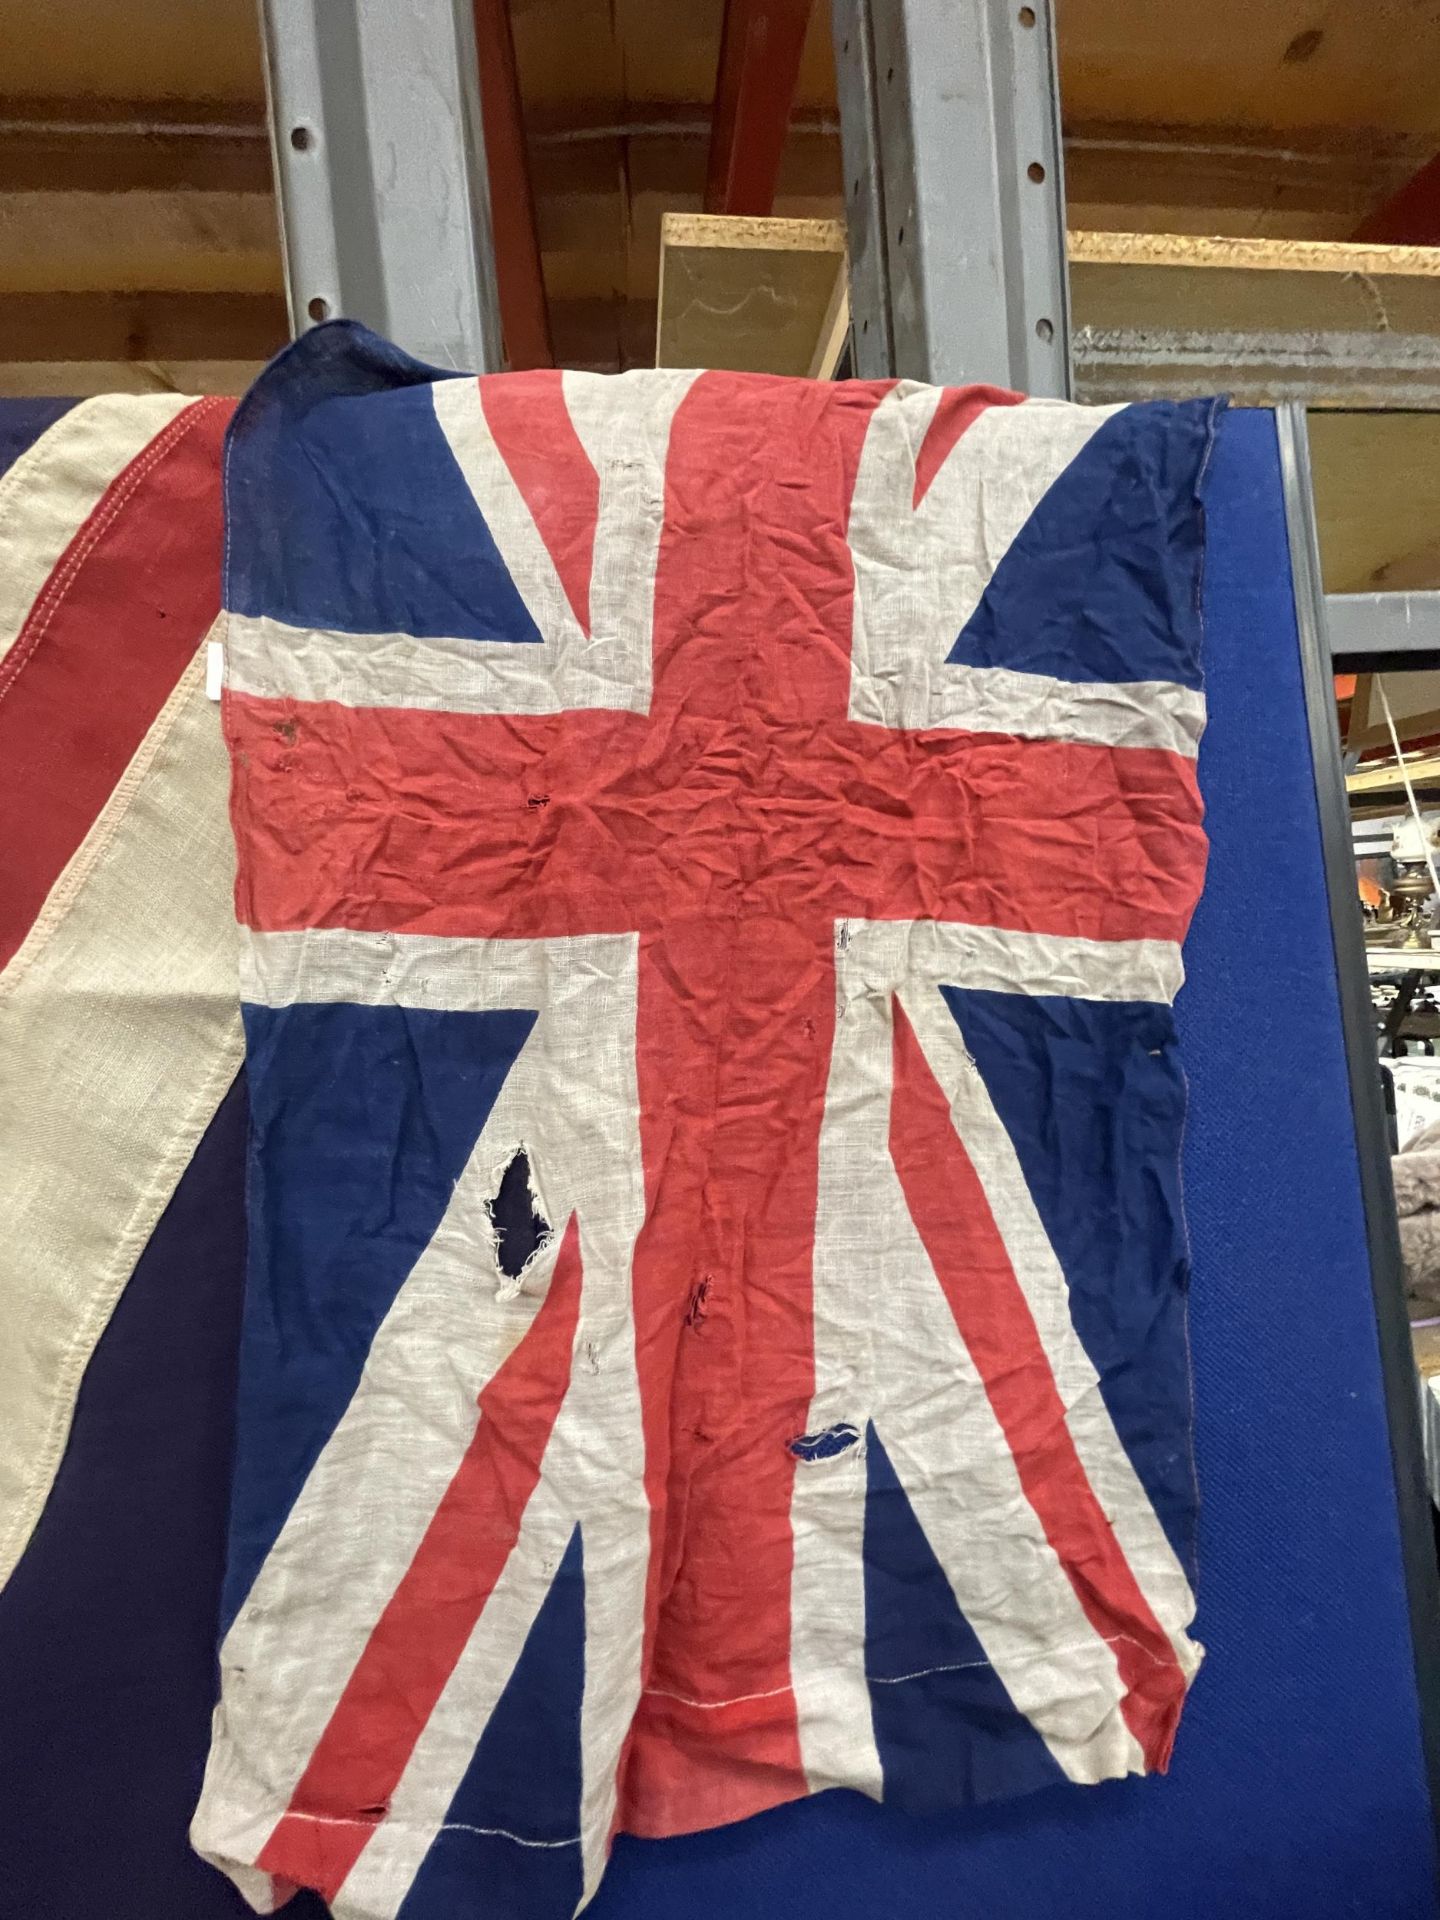 TWO VINTAGE UNION JACK FLAGS - Image 4 of 4